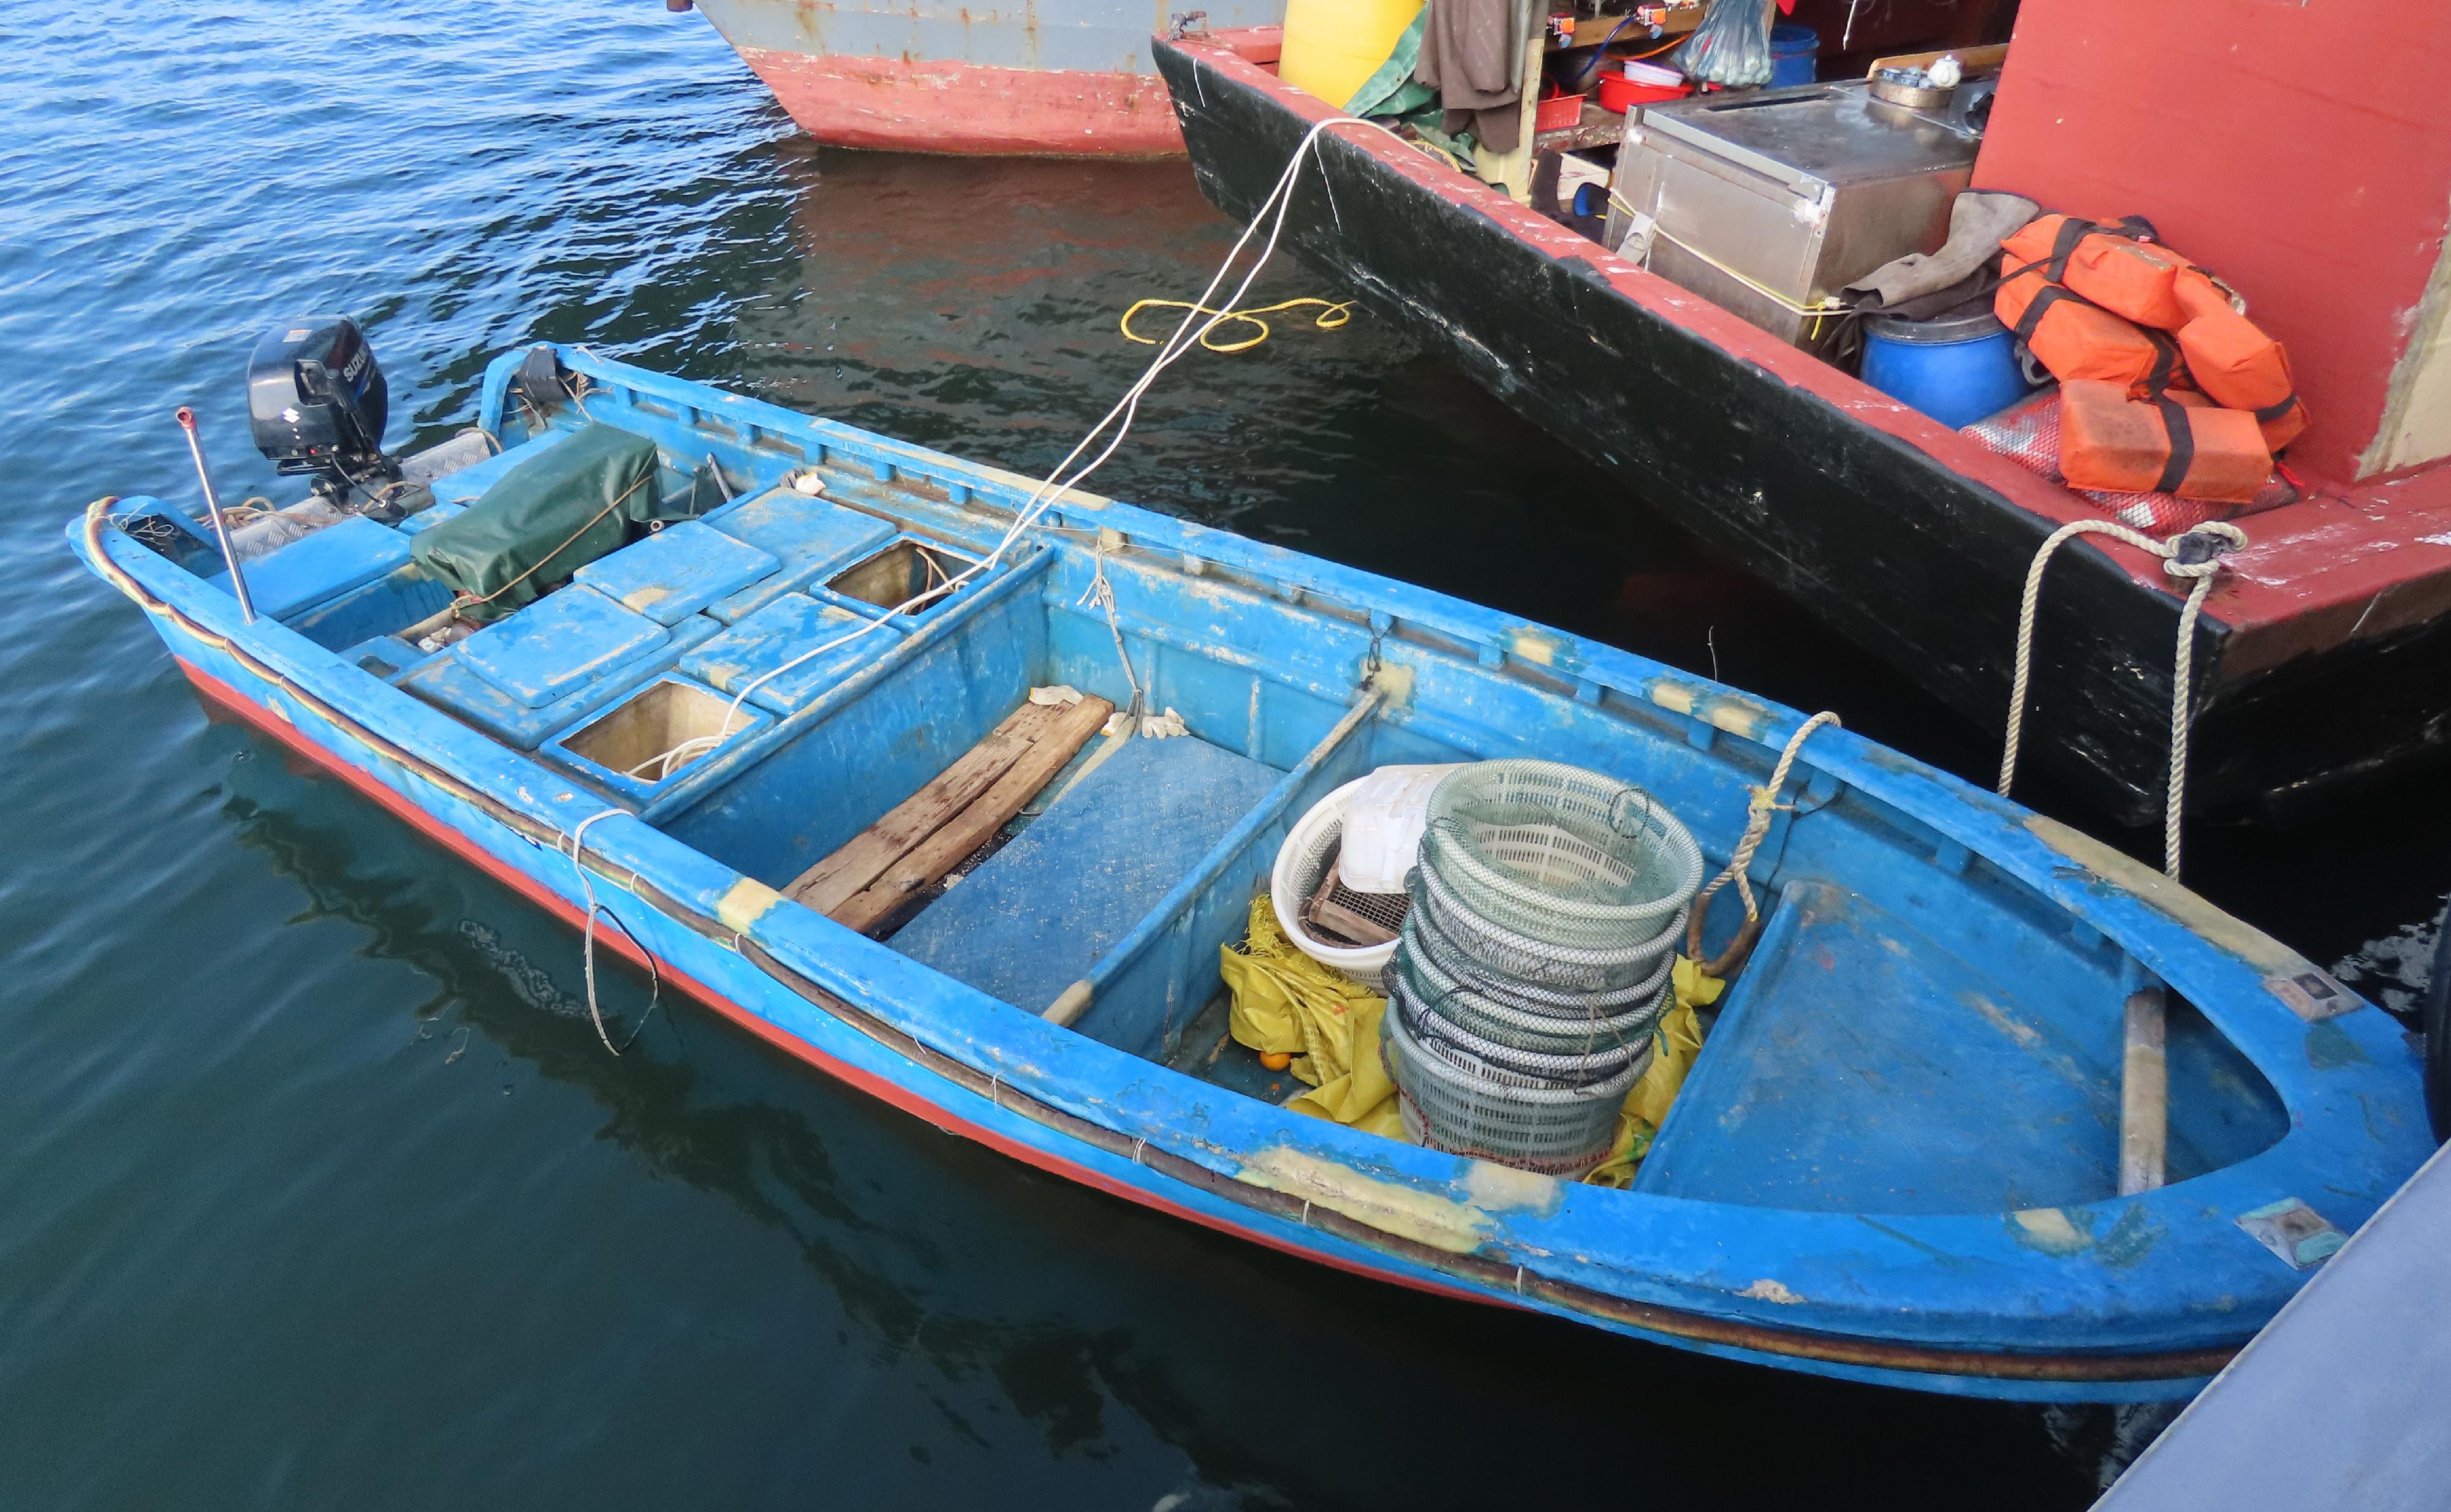 The Agriculture, Fisheries and Conservation Department today (February 3) laid charges against three Mainland fishermen suspected of engaging in illegal hookah fishing in the core area of South Lantau Marine Park. Photo shows the intercepted vessel.